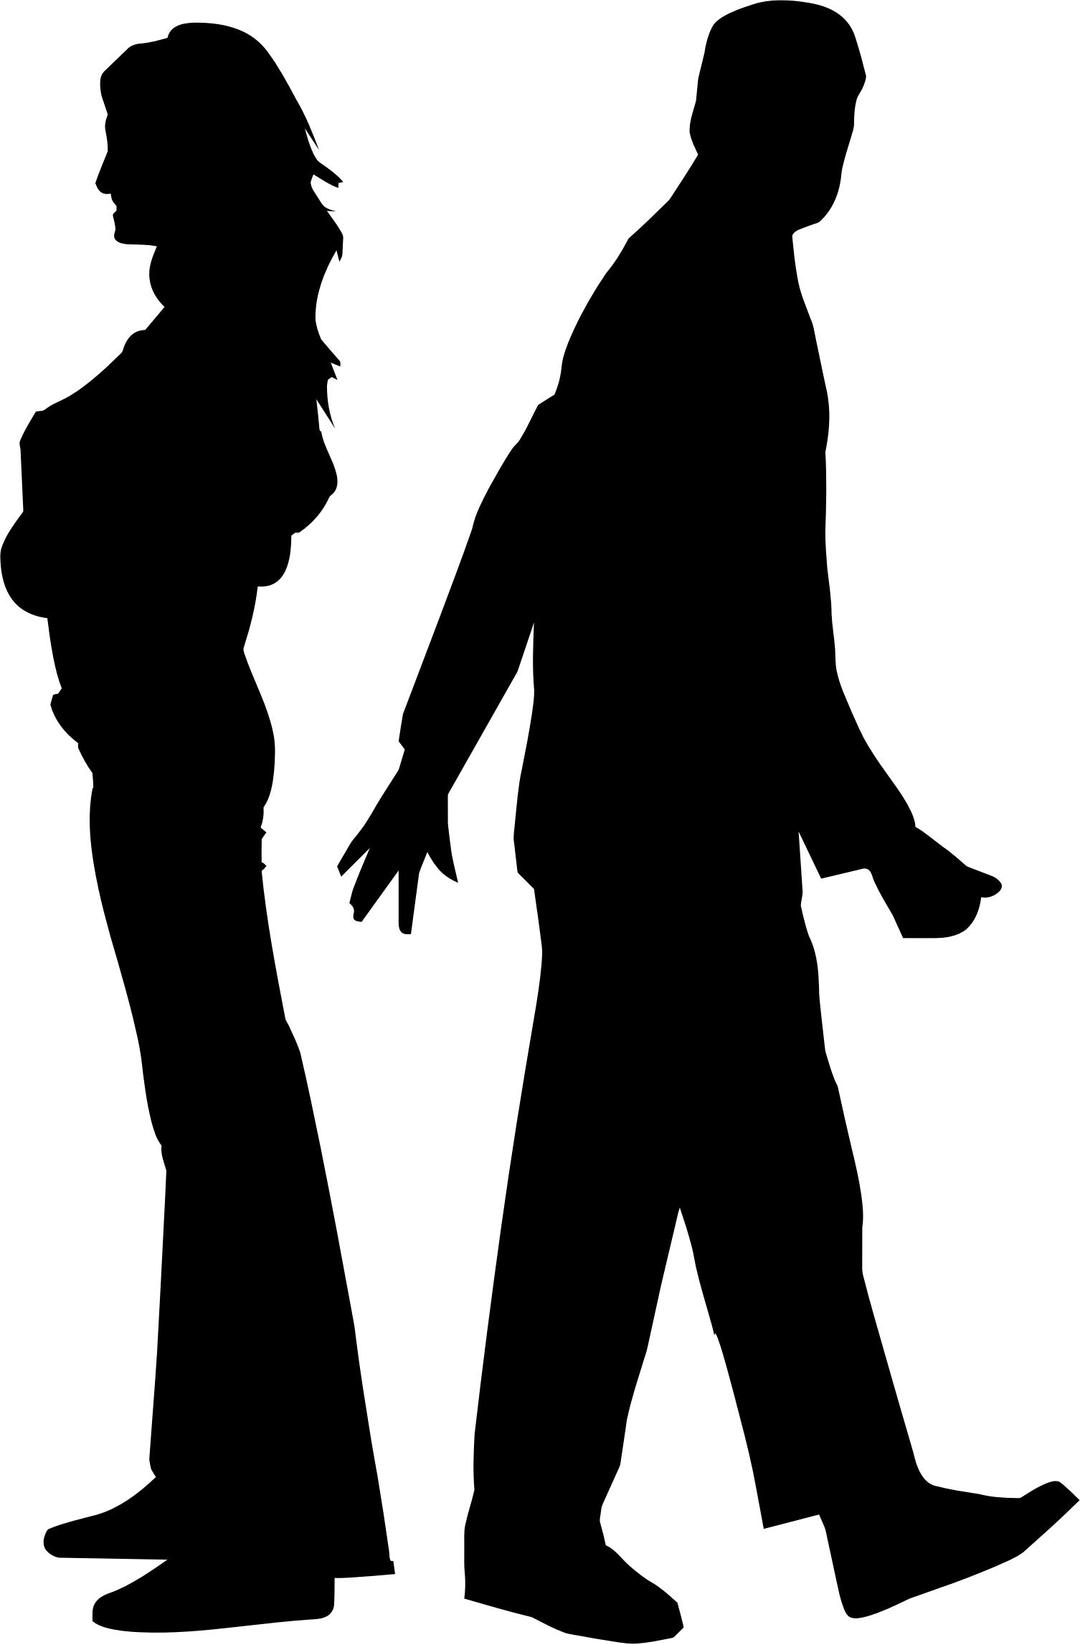 Fighting Couple Silhouette png transparent